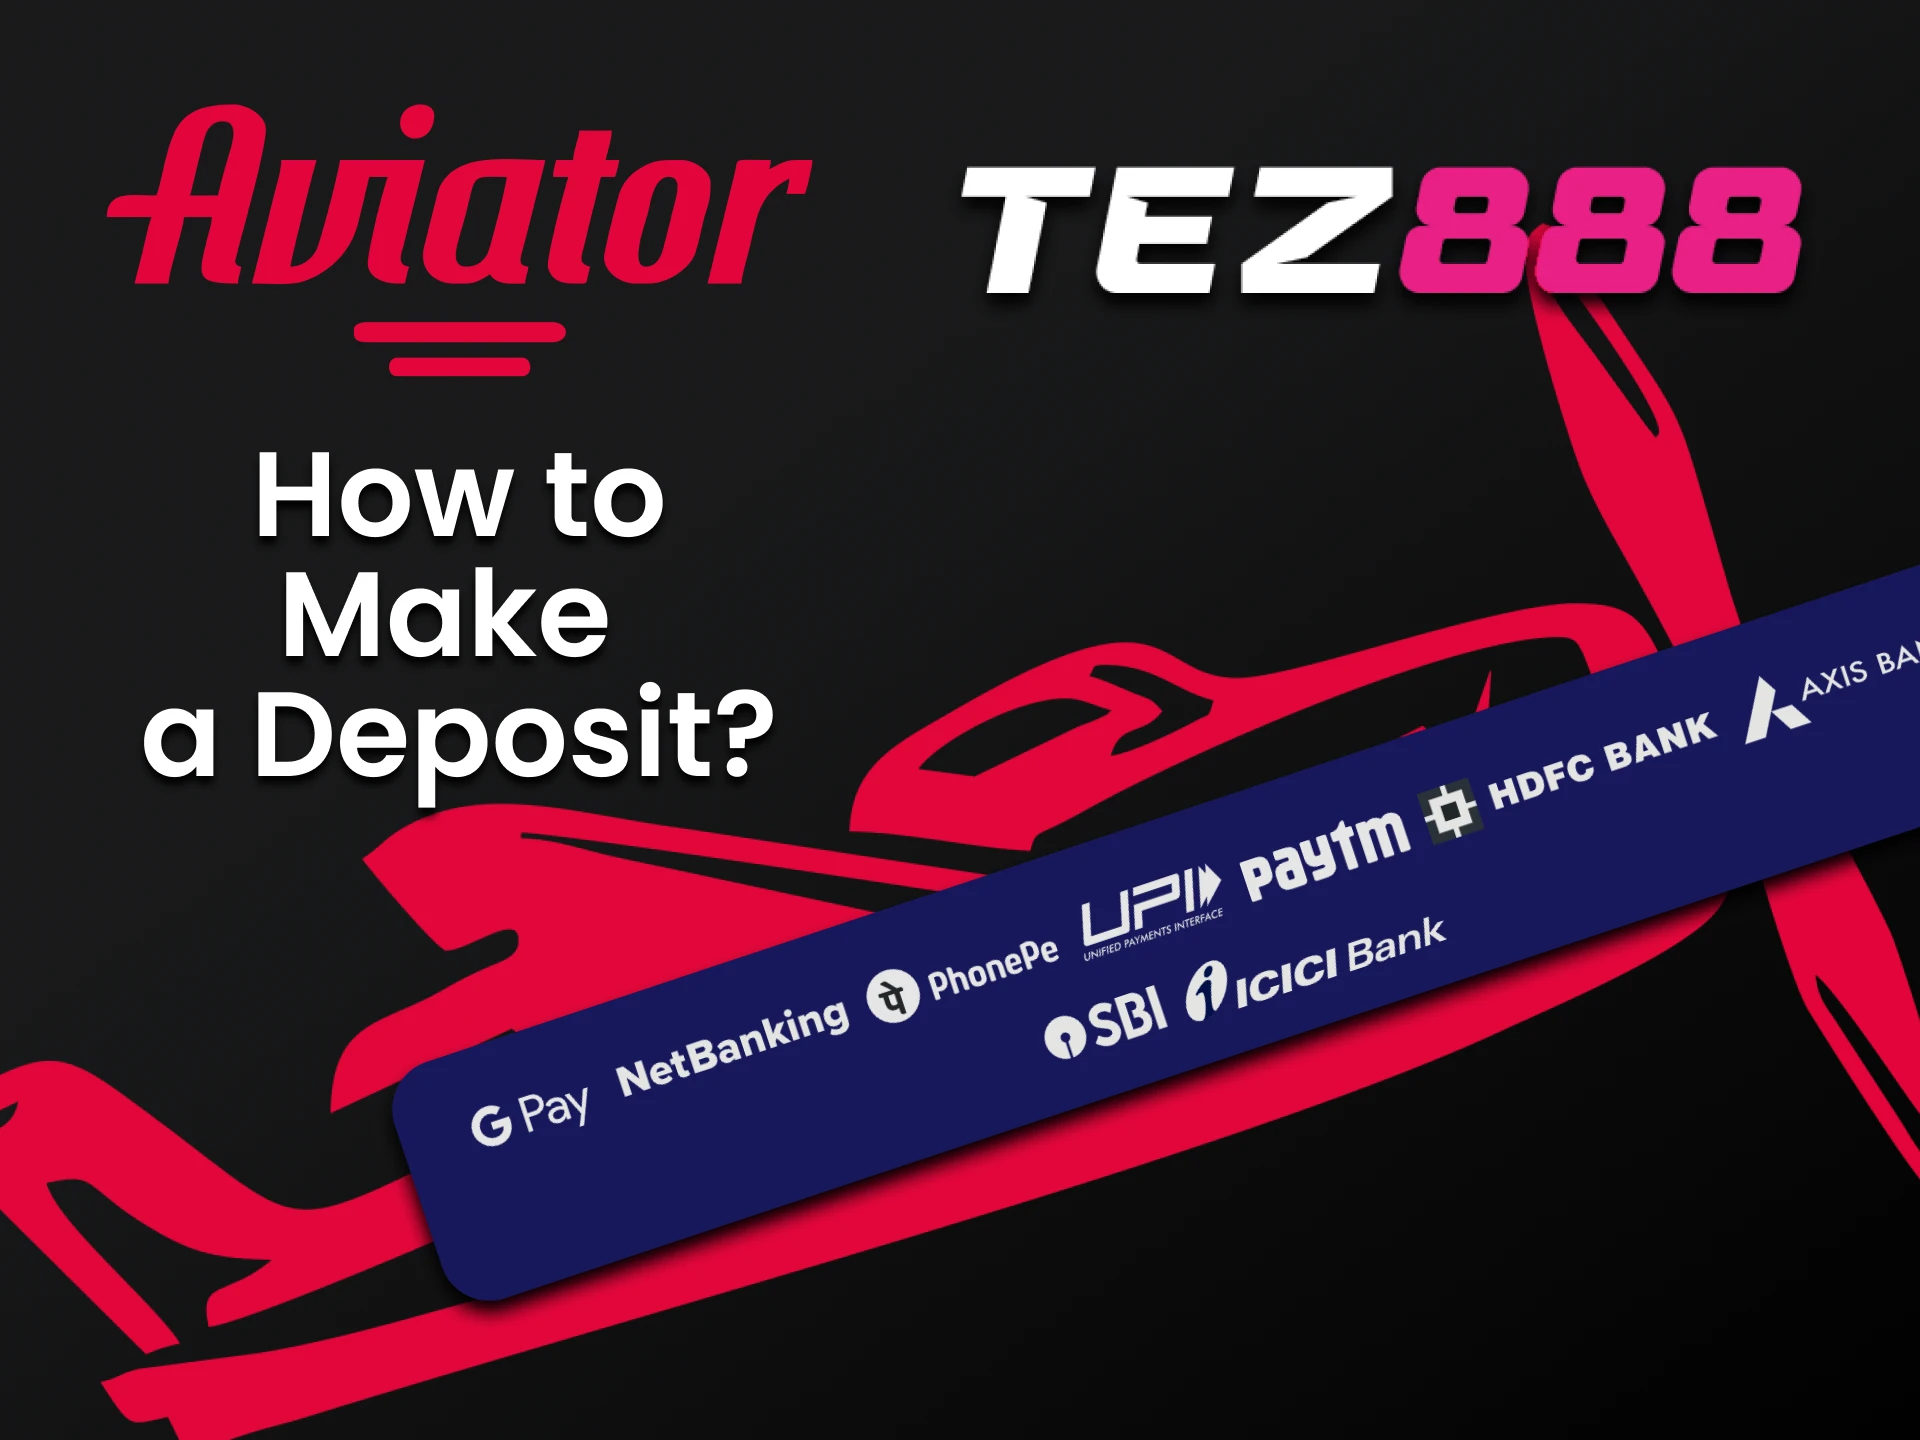 Find out how to top up funds for the Aviator game on Tez888.